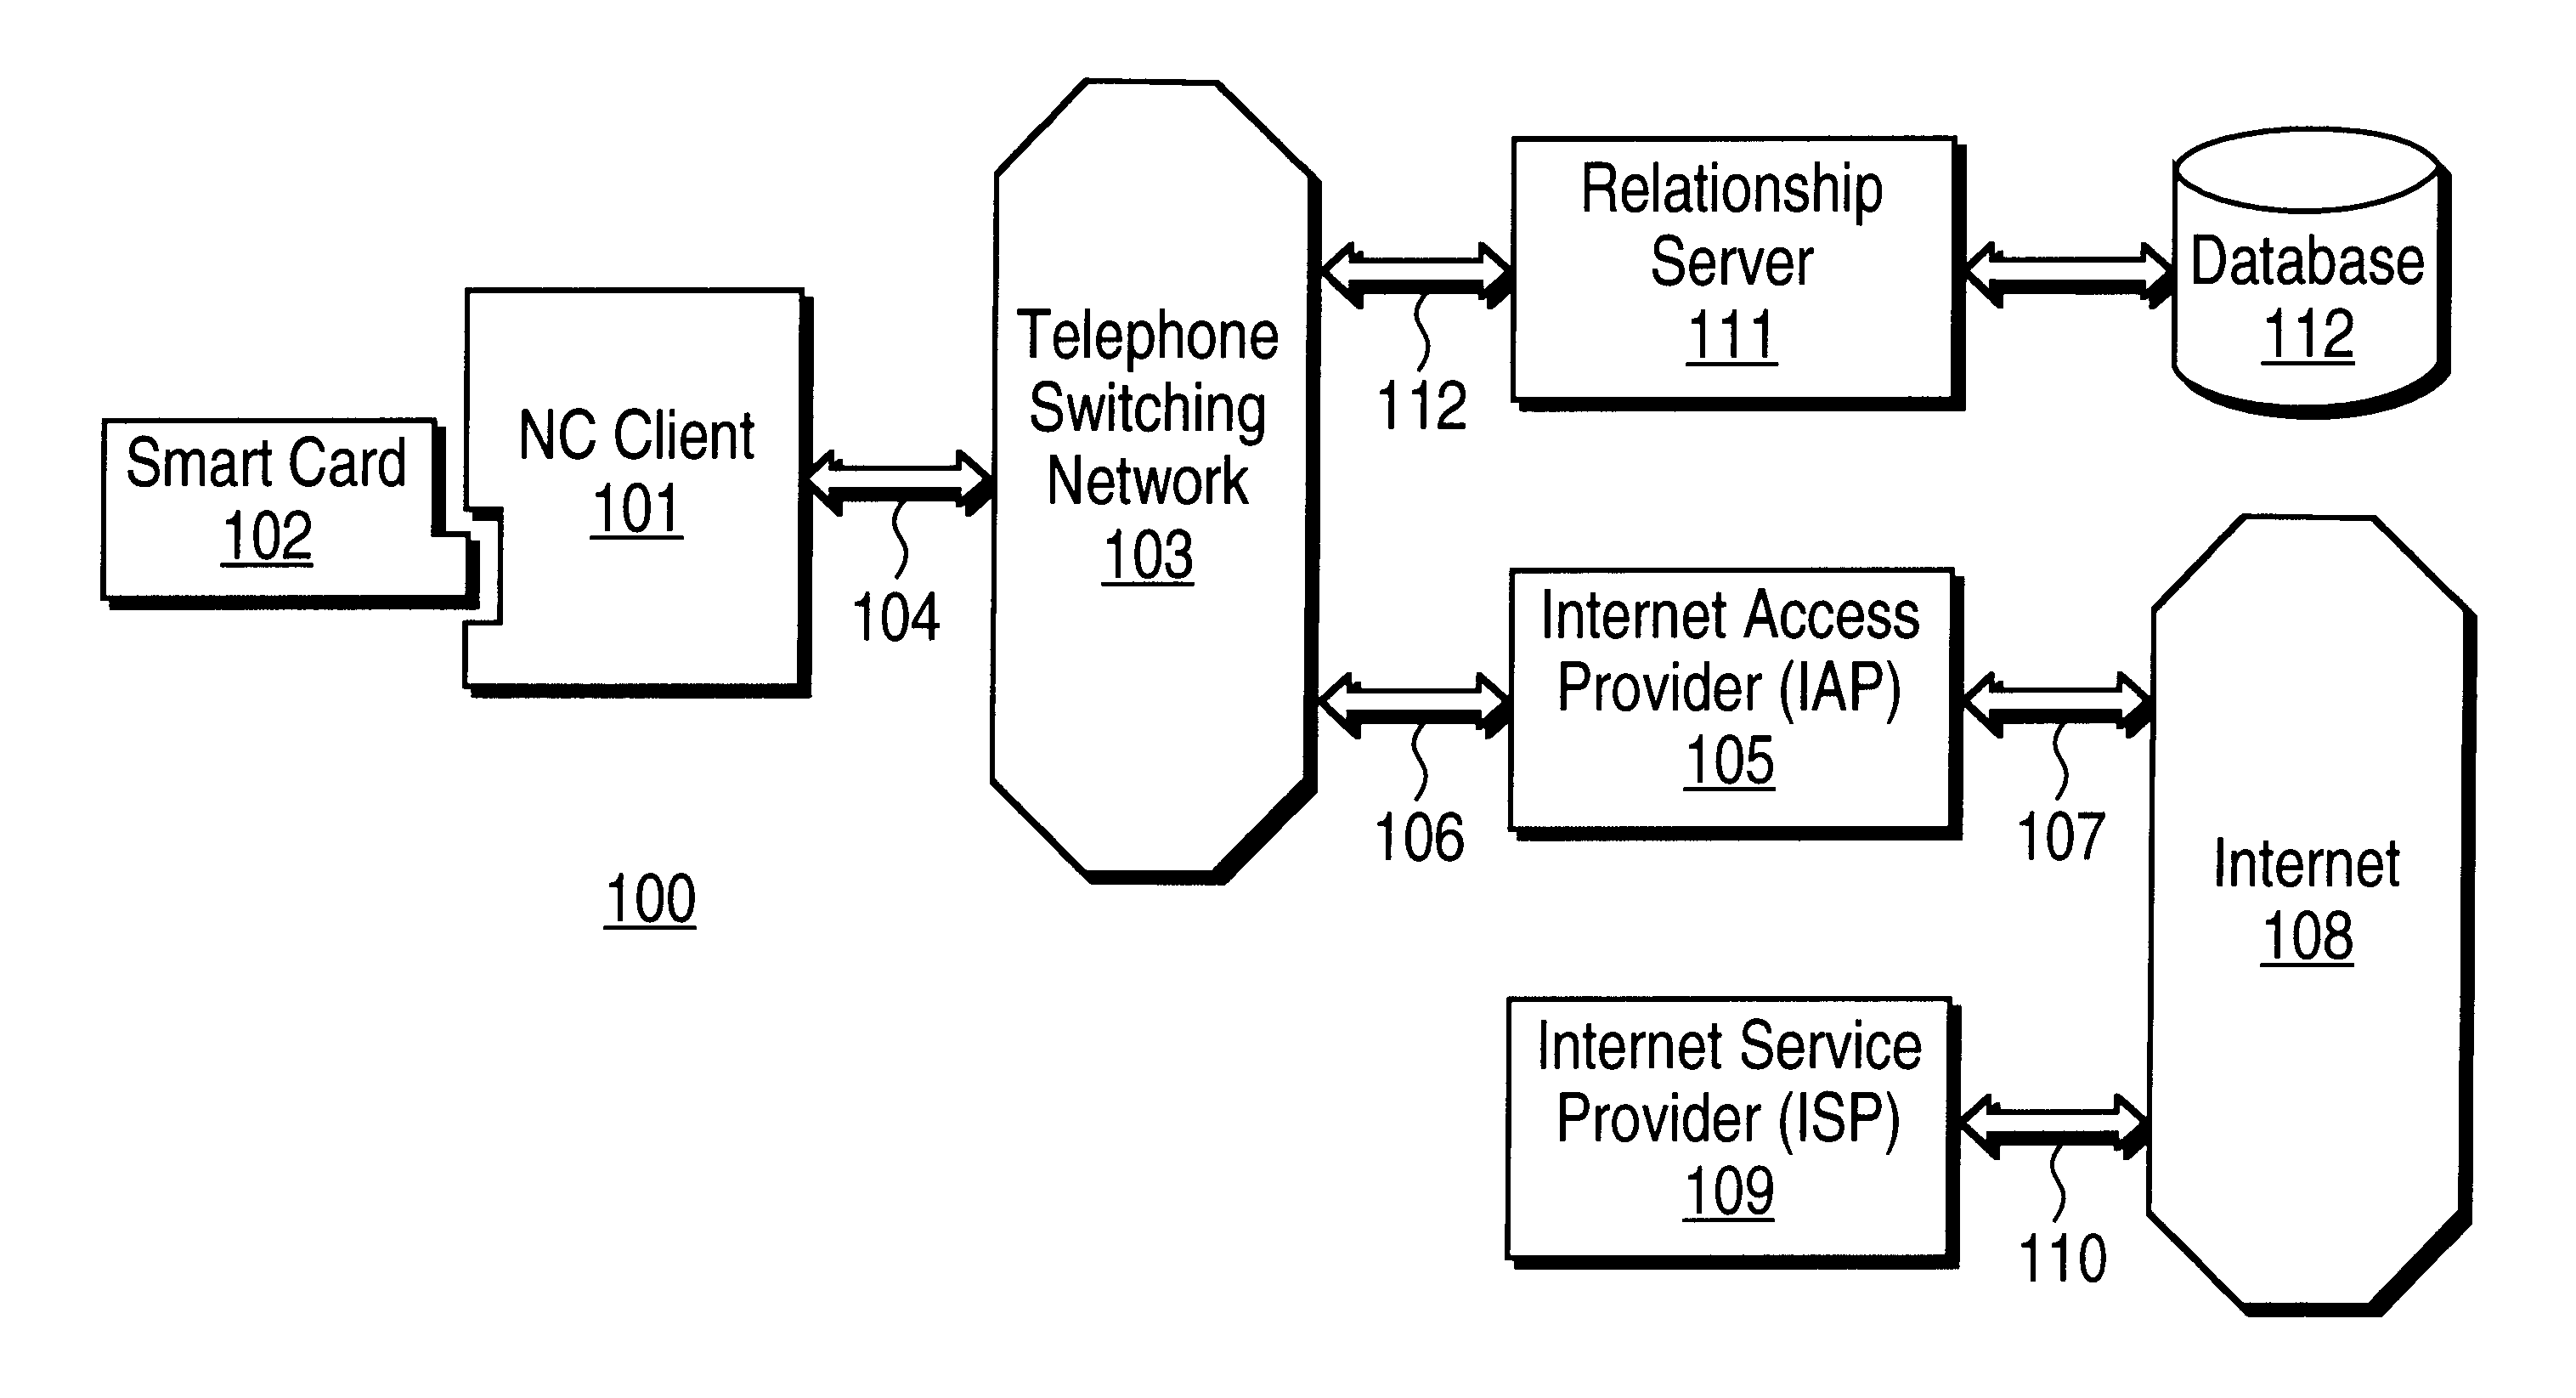 Internet service provider preliminary user registration mechanism provided by centralized authority